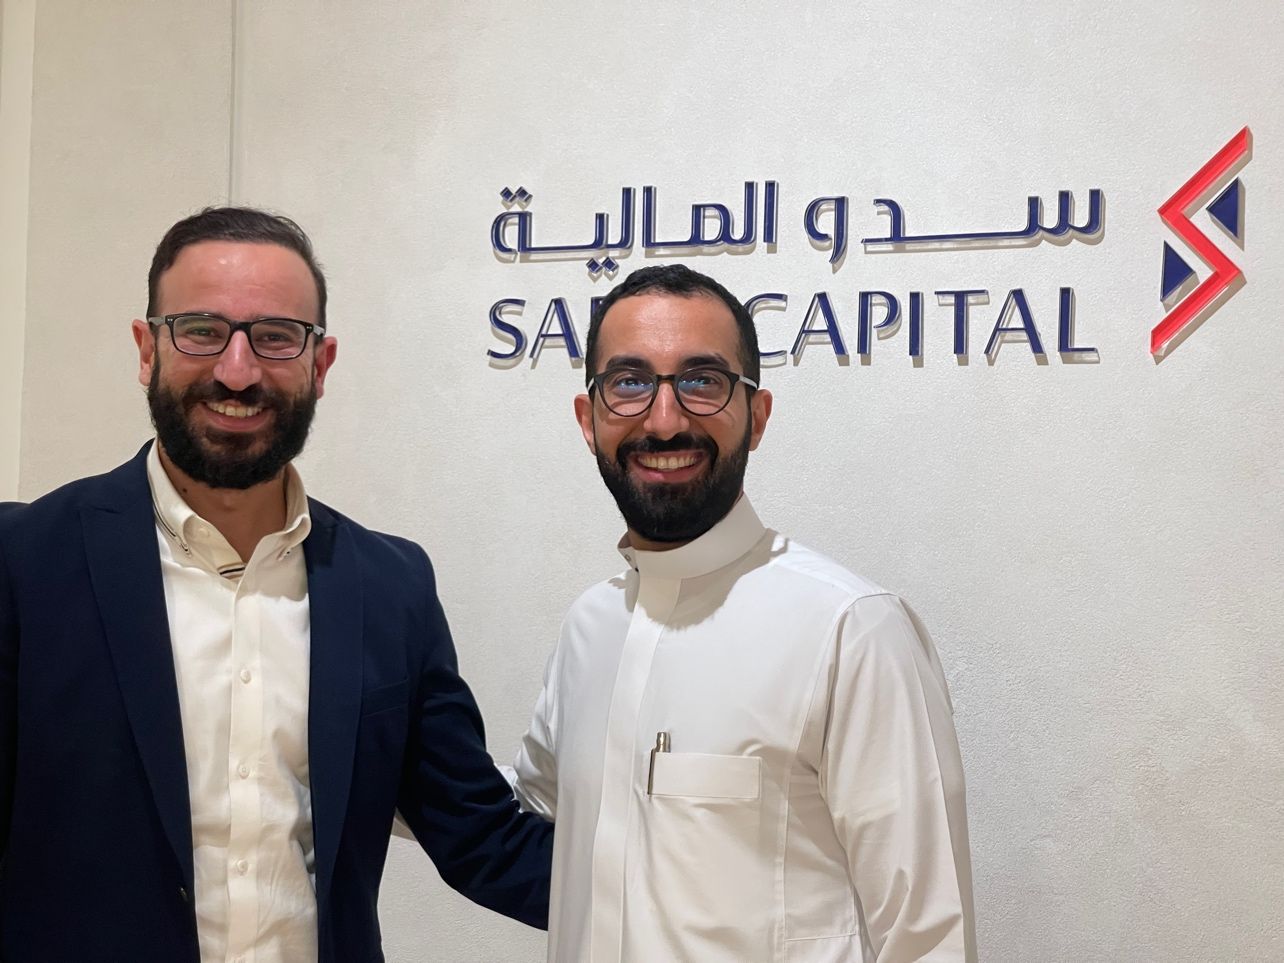 Alefredo EdTech Joins Visionary Founders at Sadu Capital’s Founder’s Day for Entrepreneurial Insights and Connections?